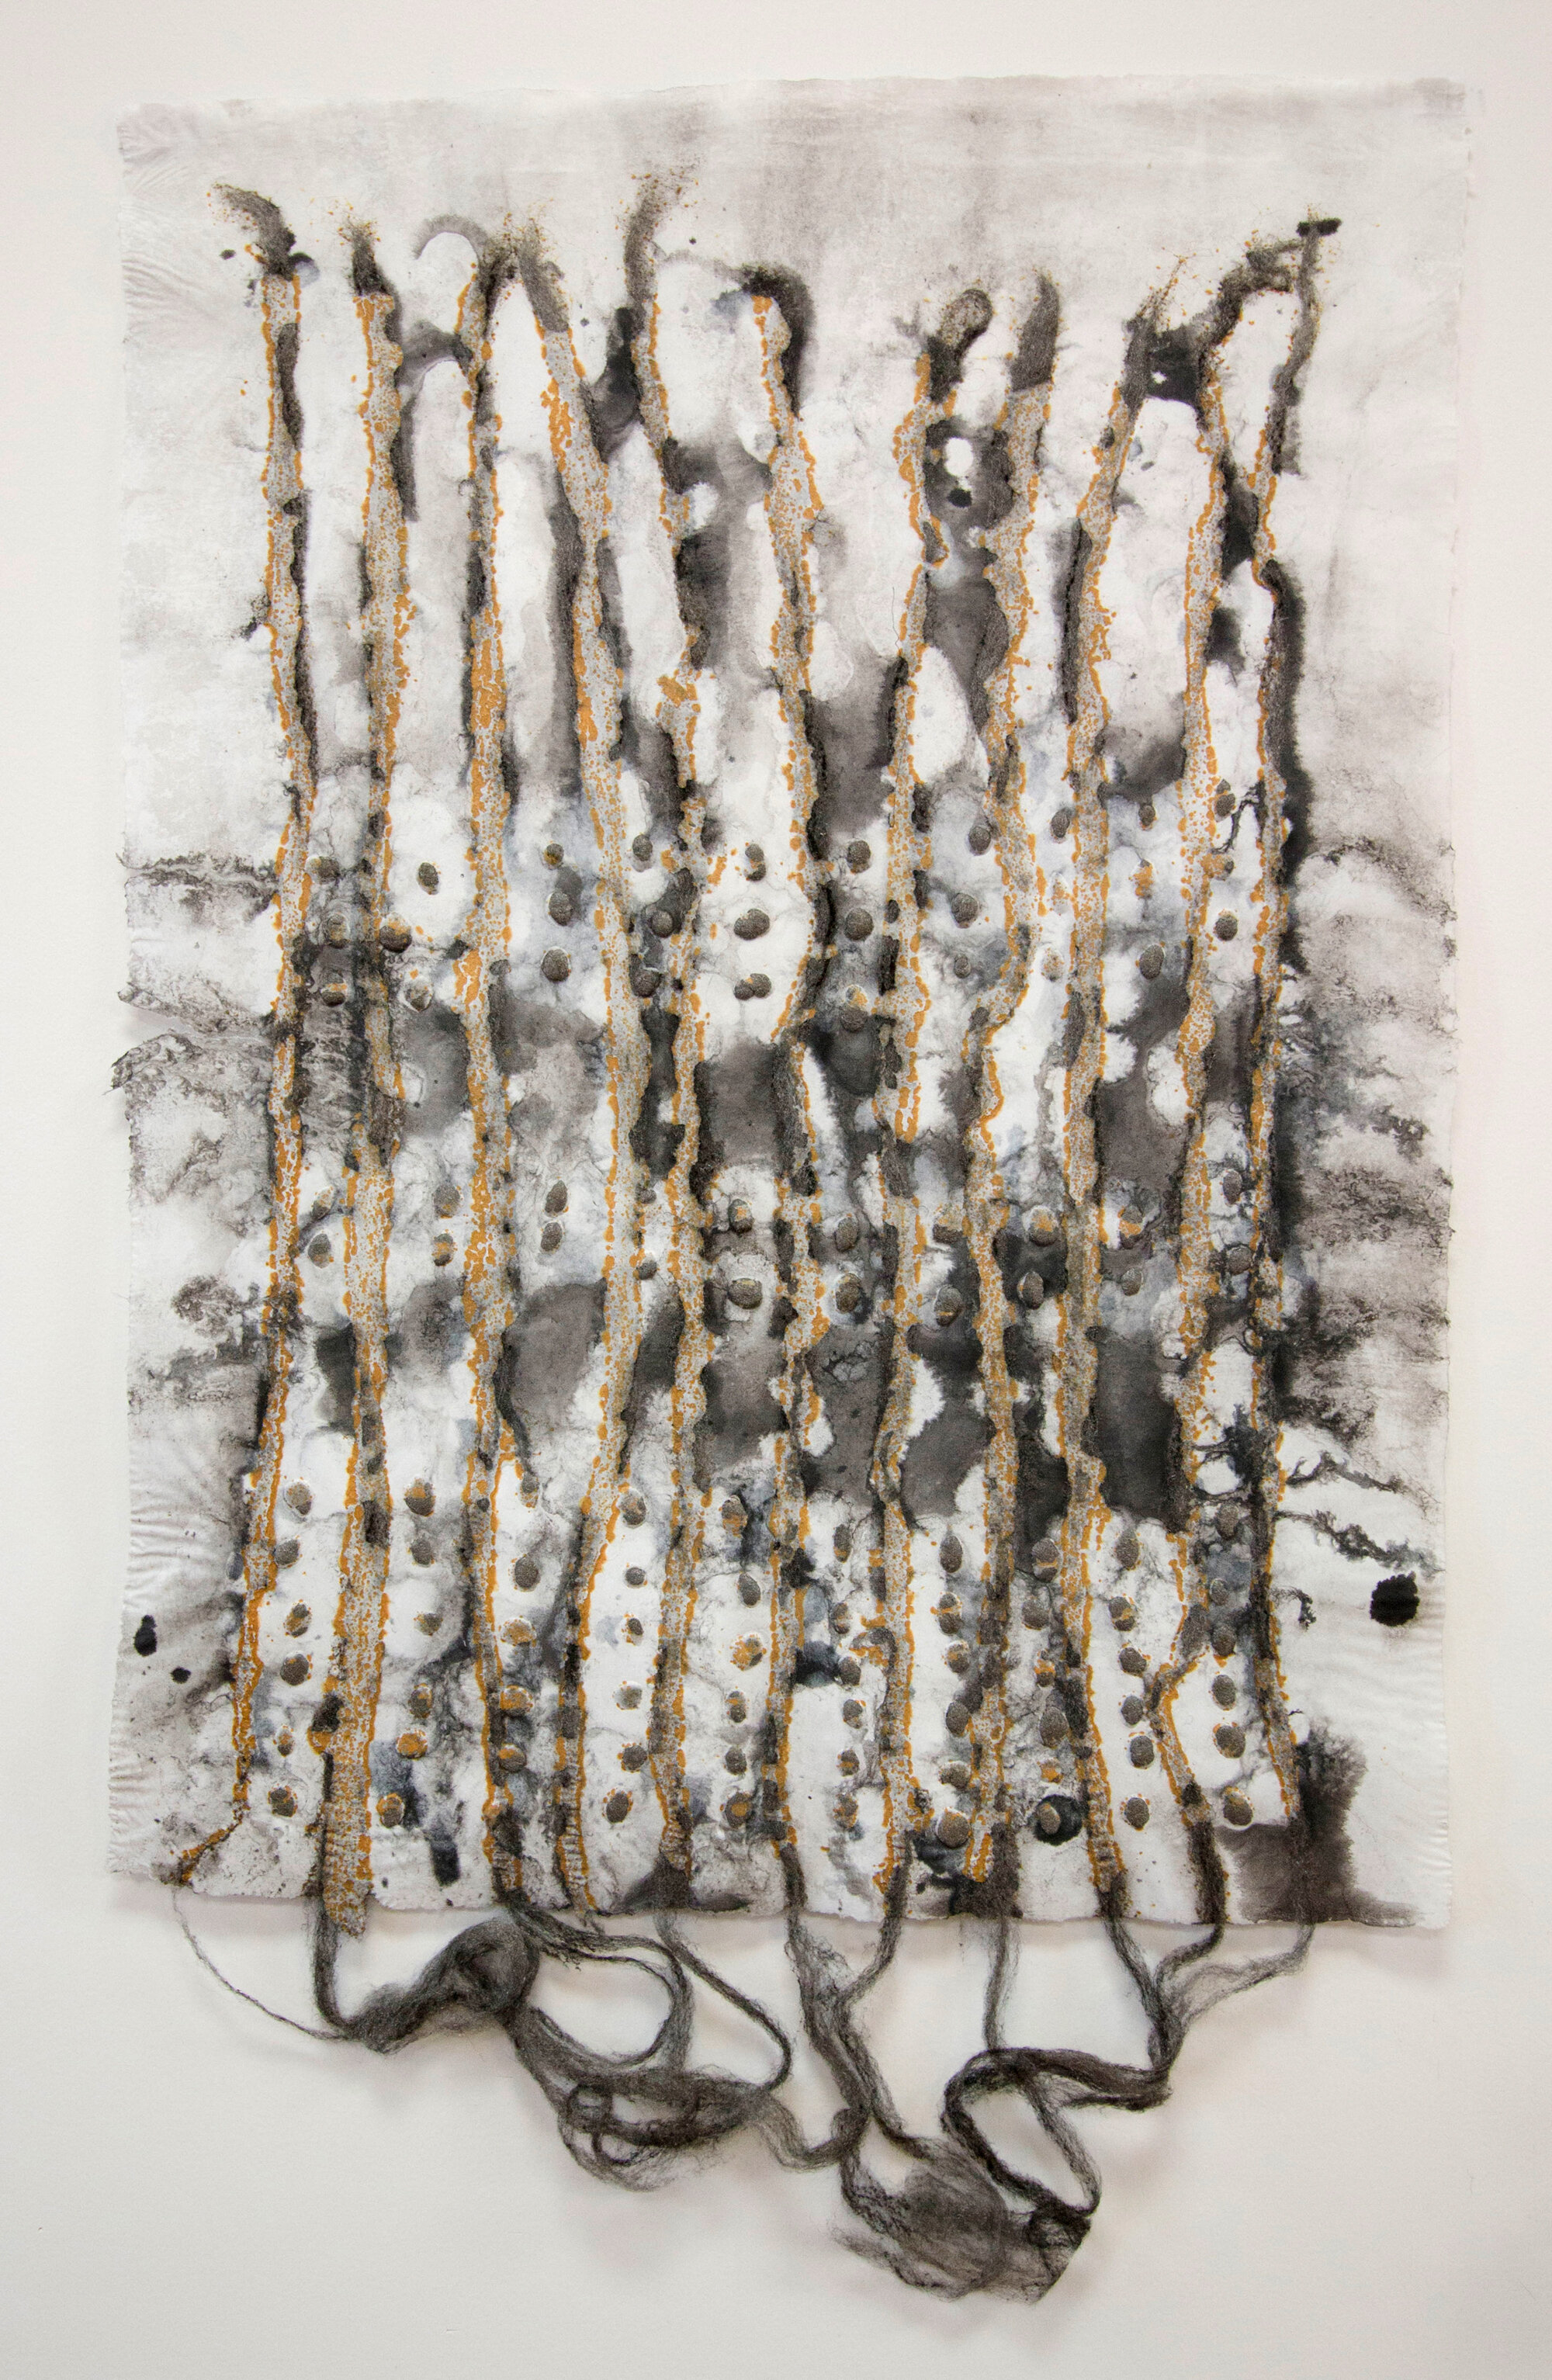   Untitled , 2014 Steel wool and linen handmade paper 36 x 22 in. 